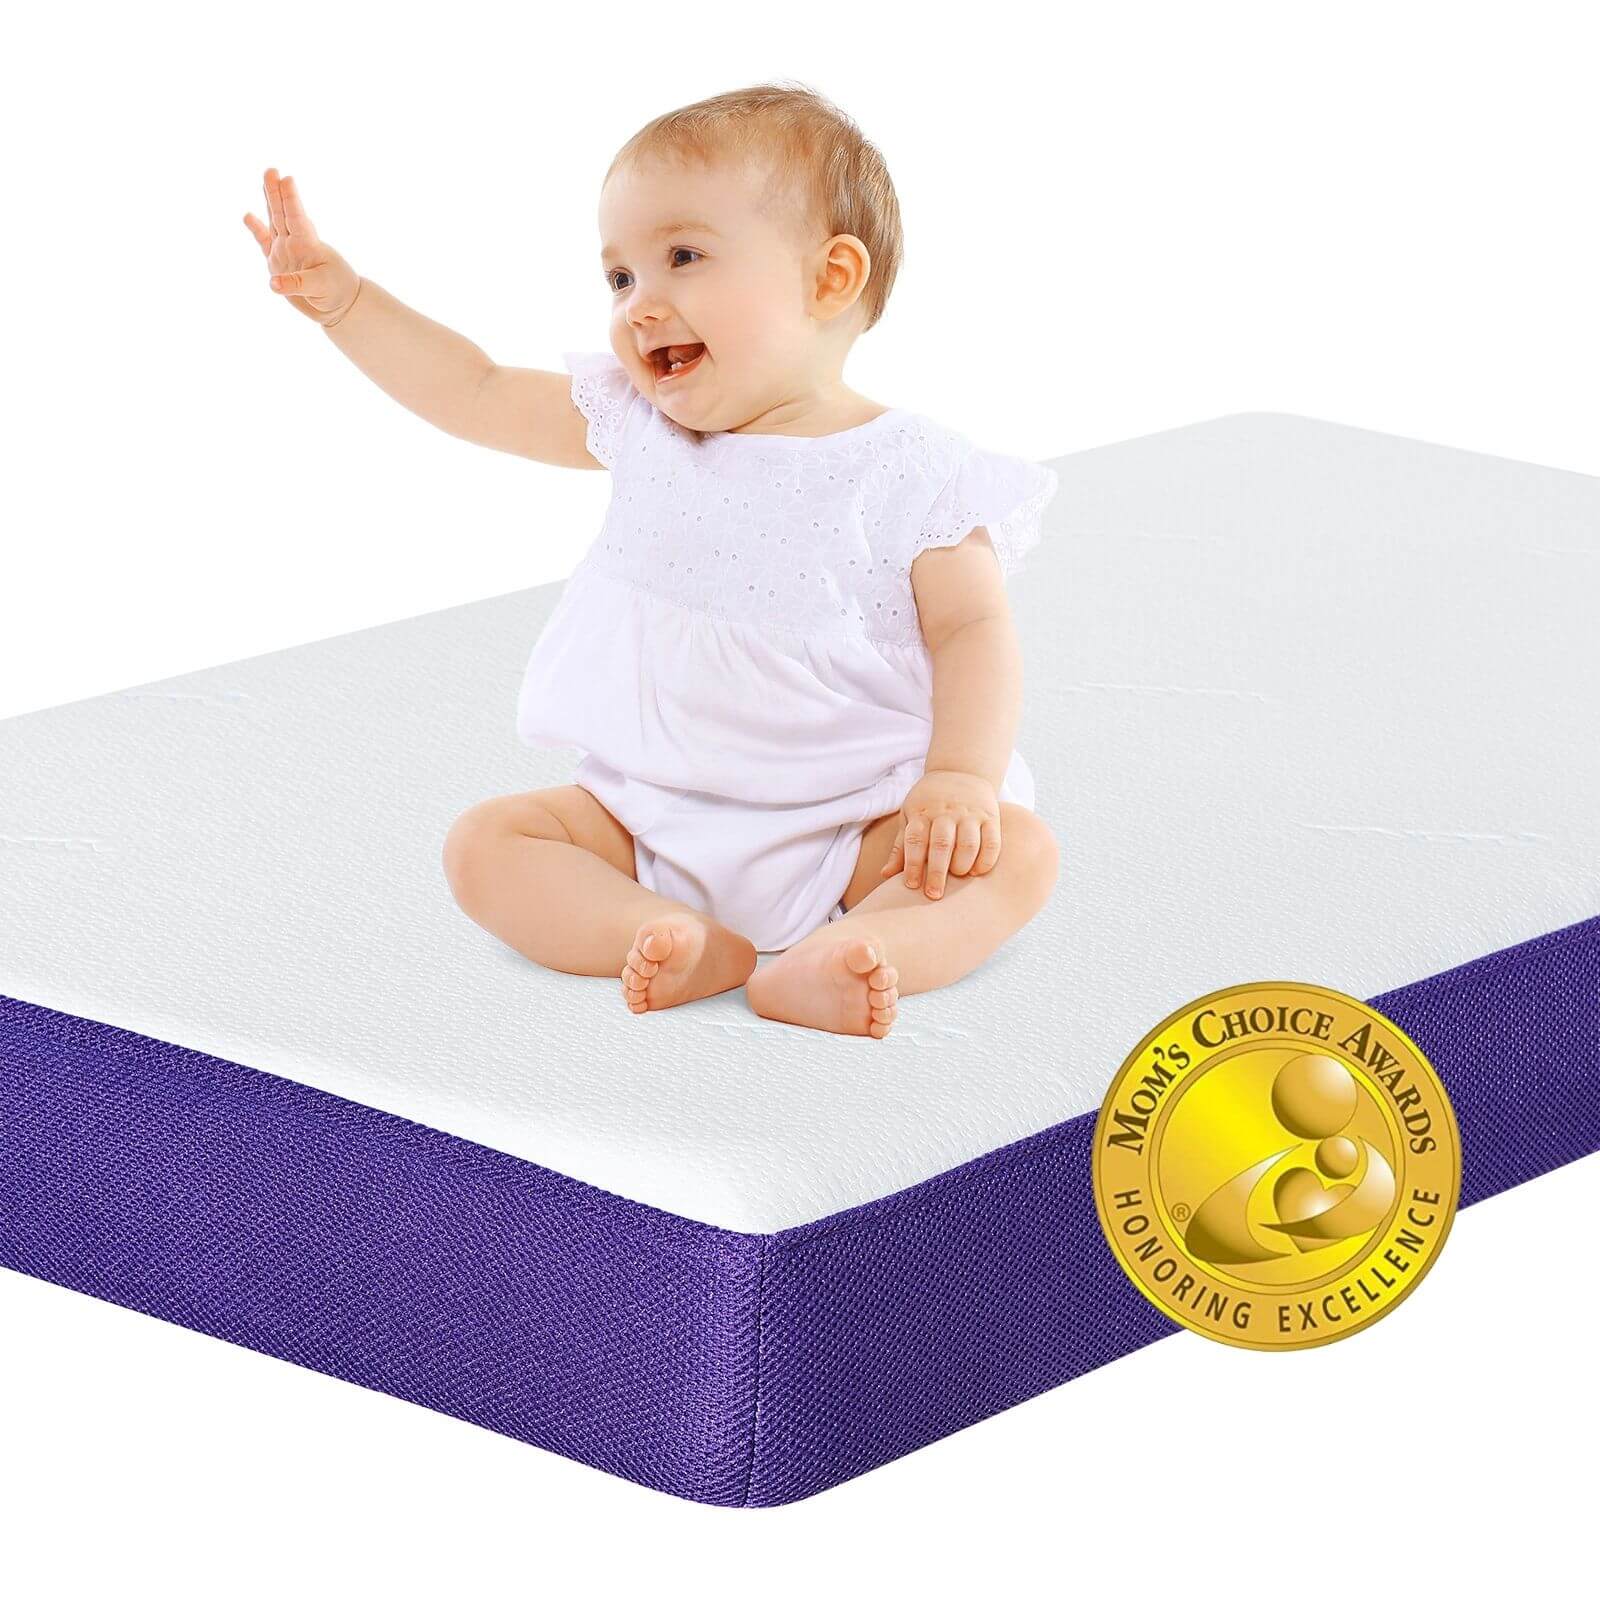 Babelio Cloud 2 Crib & Toddler Mattress with Tencel Cover – Dual-Sided Memory Foam, CertiPUR-US Certified, Breathable Design